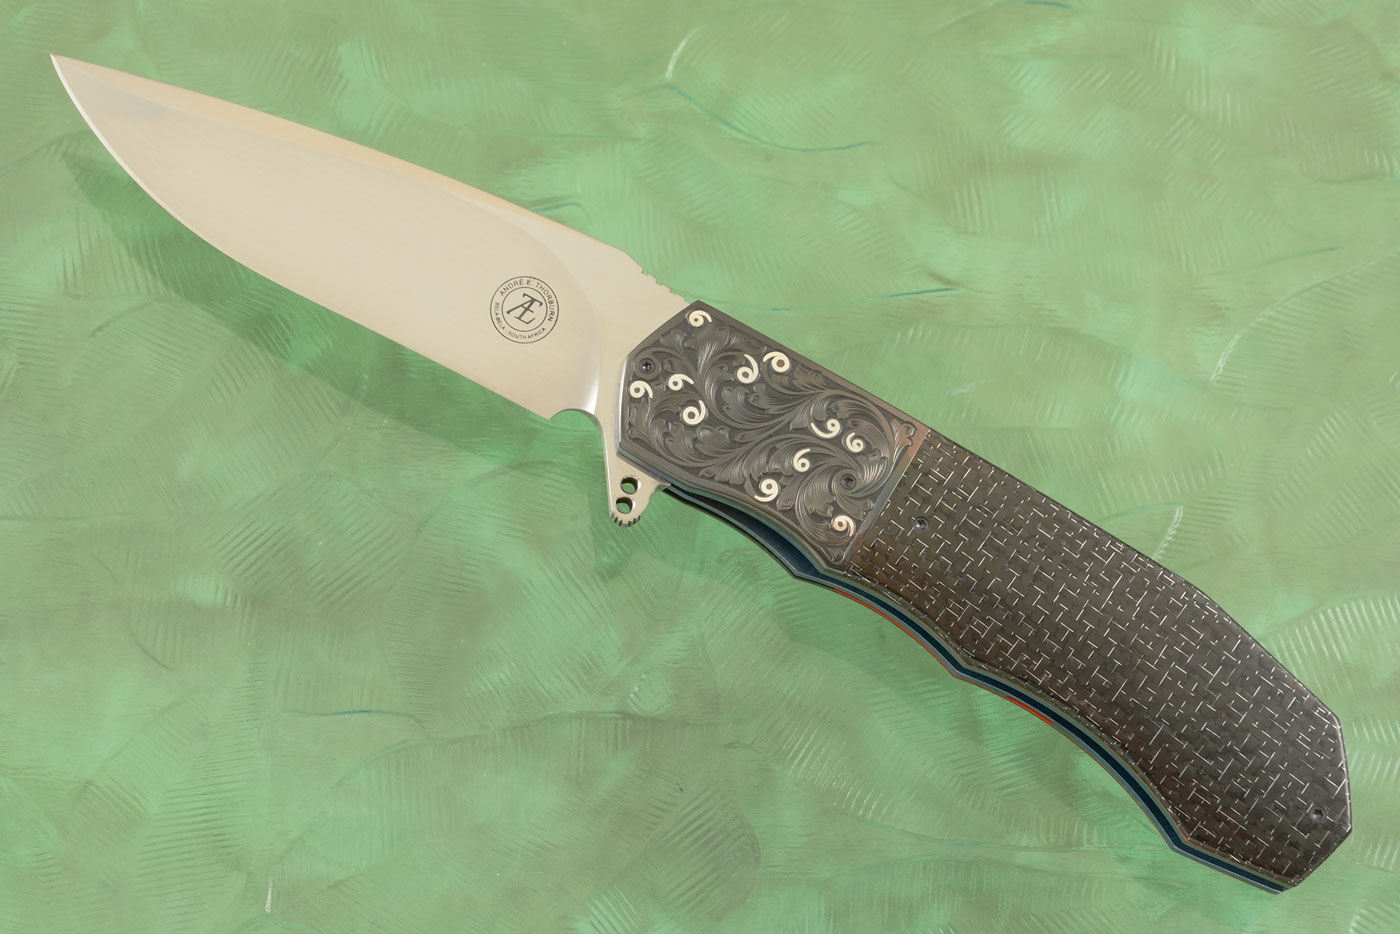 L44 Flipper - Silver Strike Carbon Fiber with Engraved Zirconium and Inlaid Silver (Ceramic IKBS) - M390